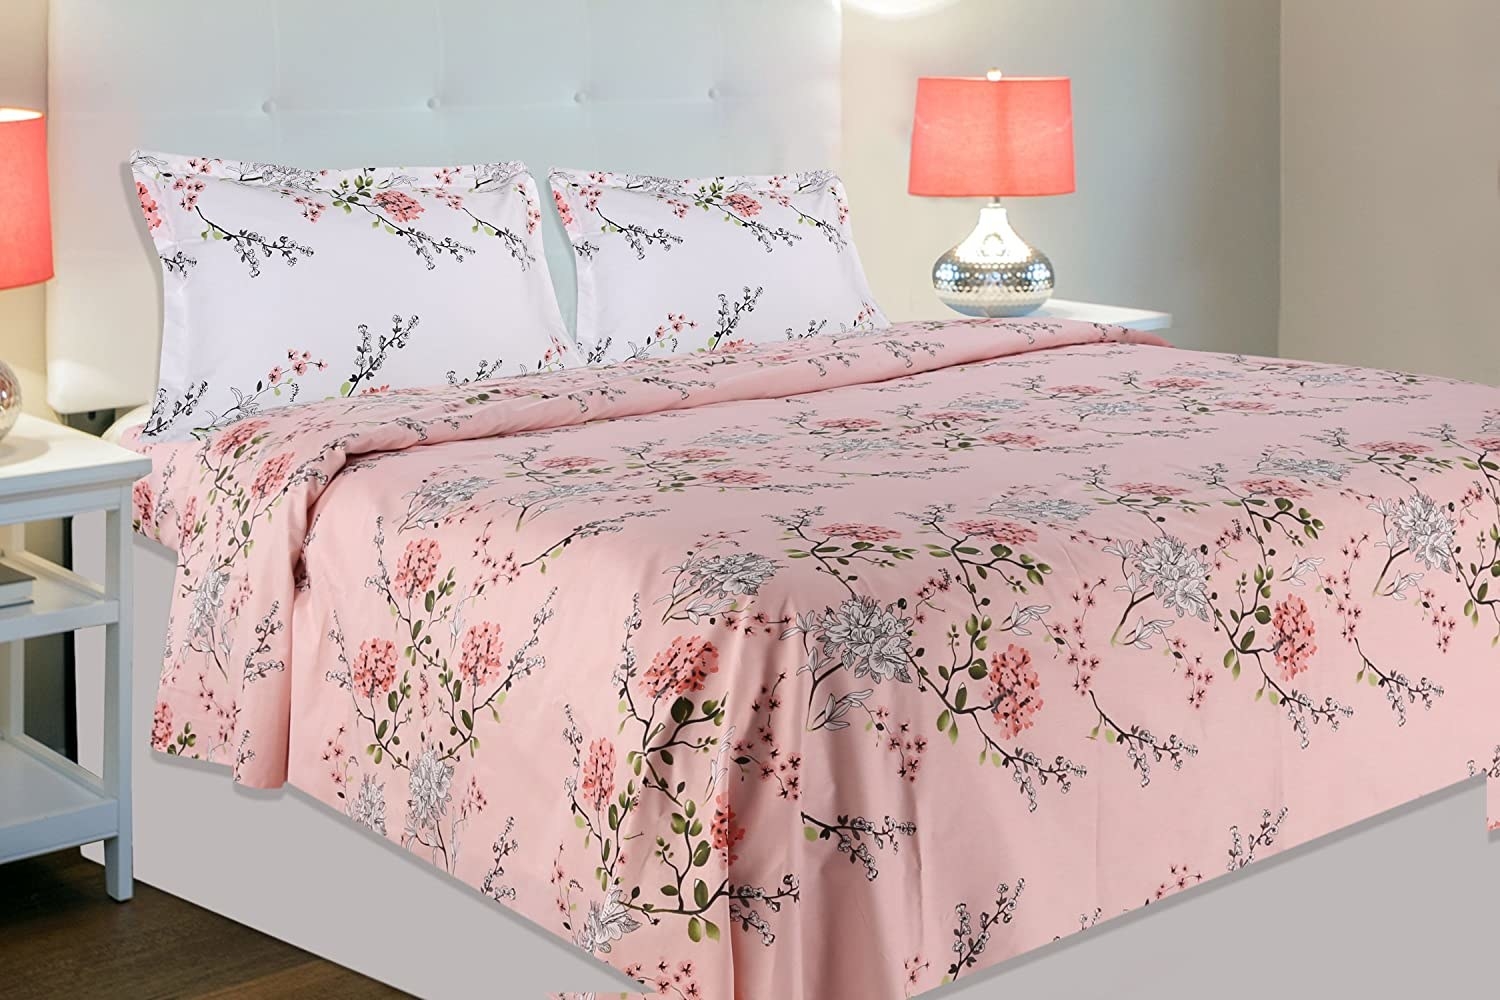 A pink and white floral bedsheet on a bed.